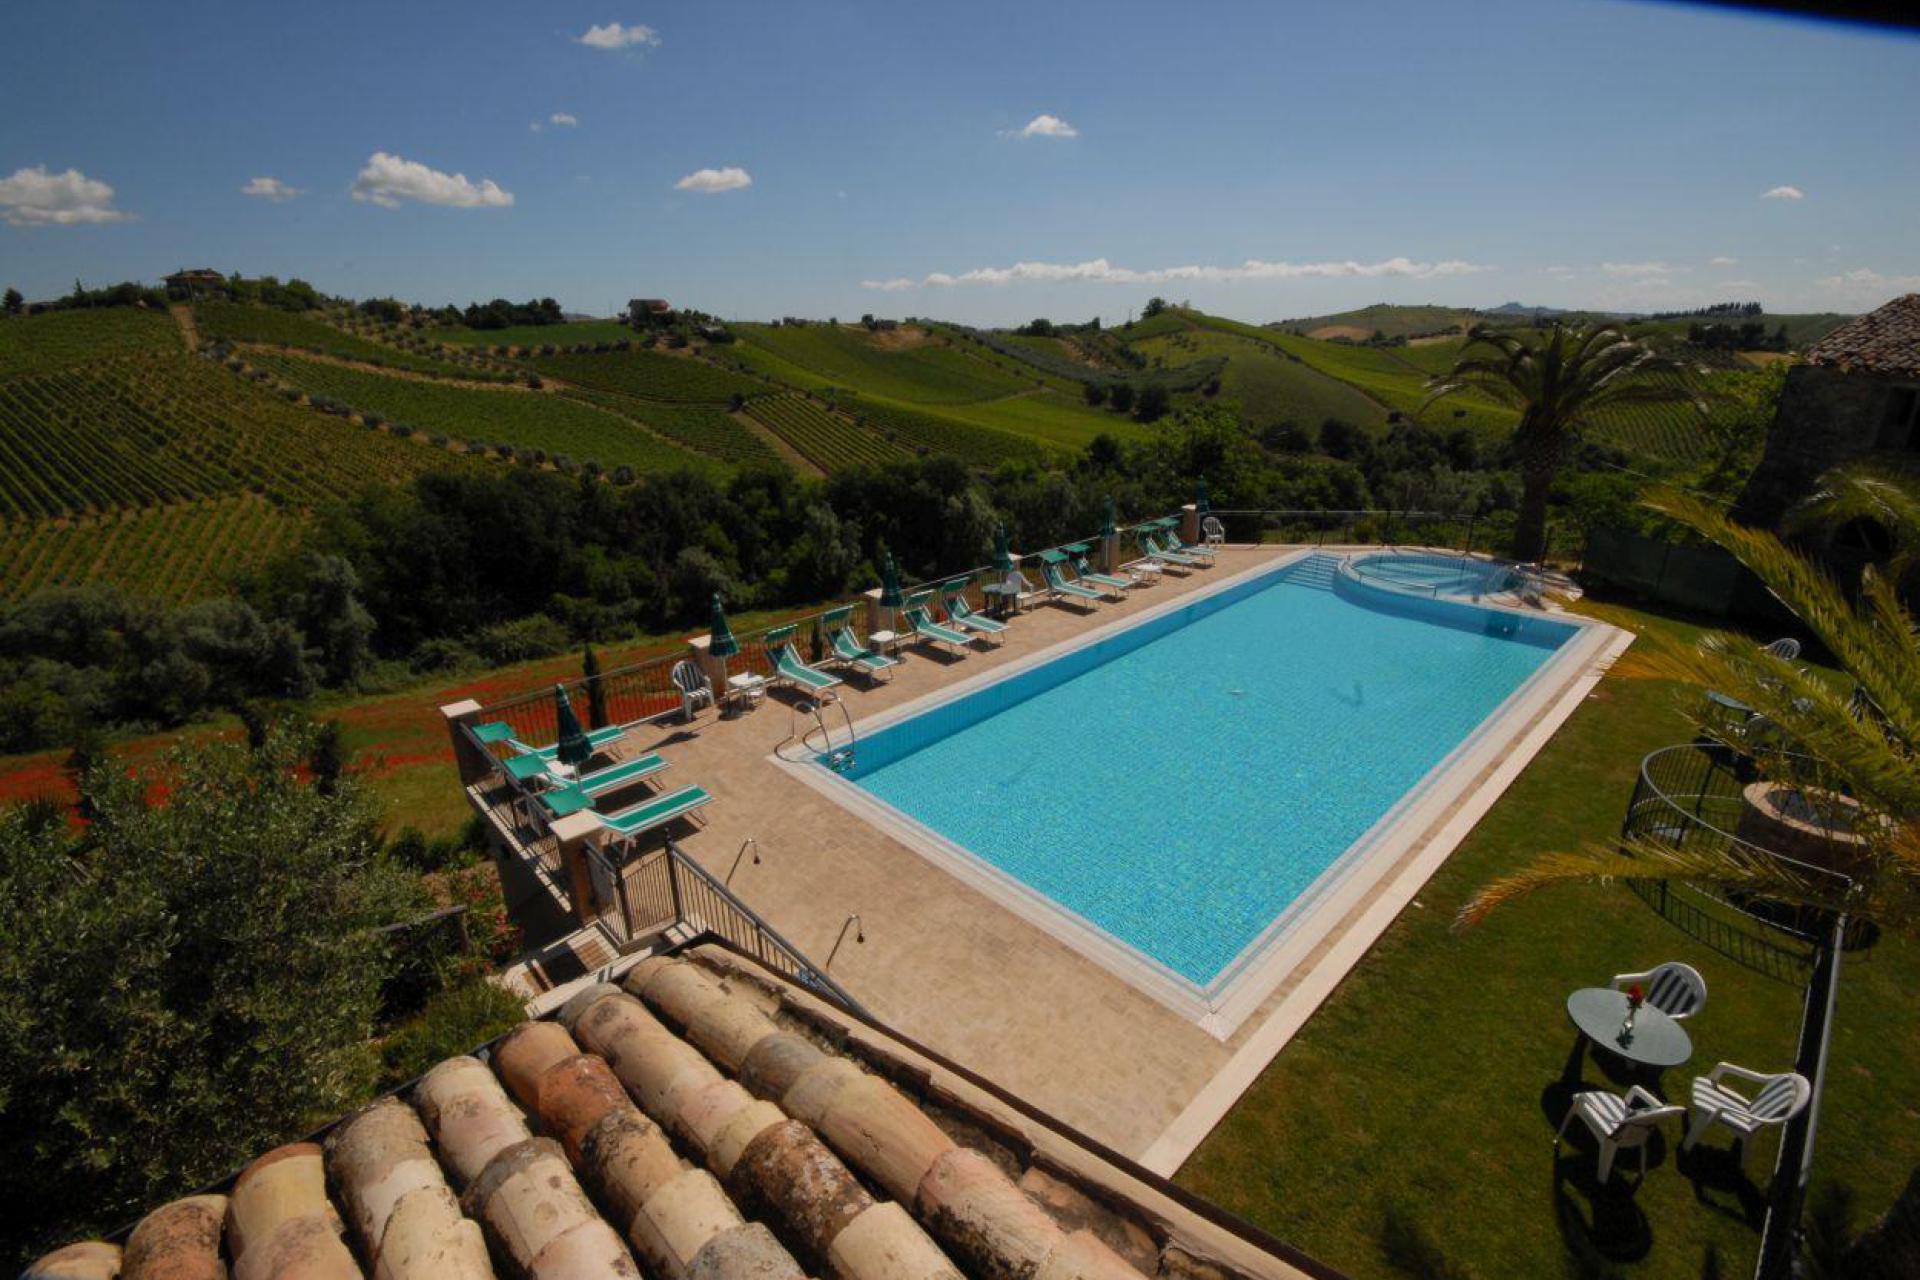 Agriturismo Marche Agriturismo le Marche, welcoming and child friendly